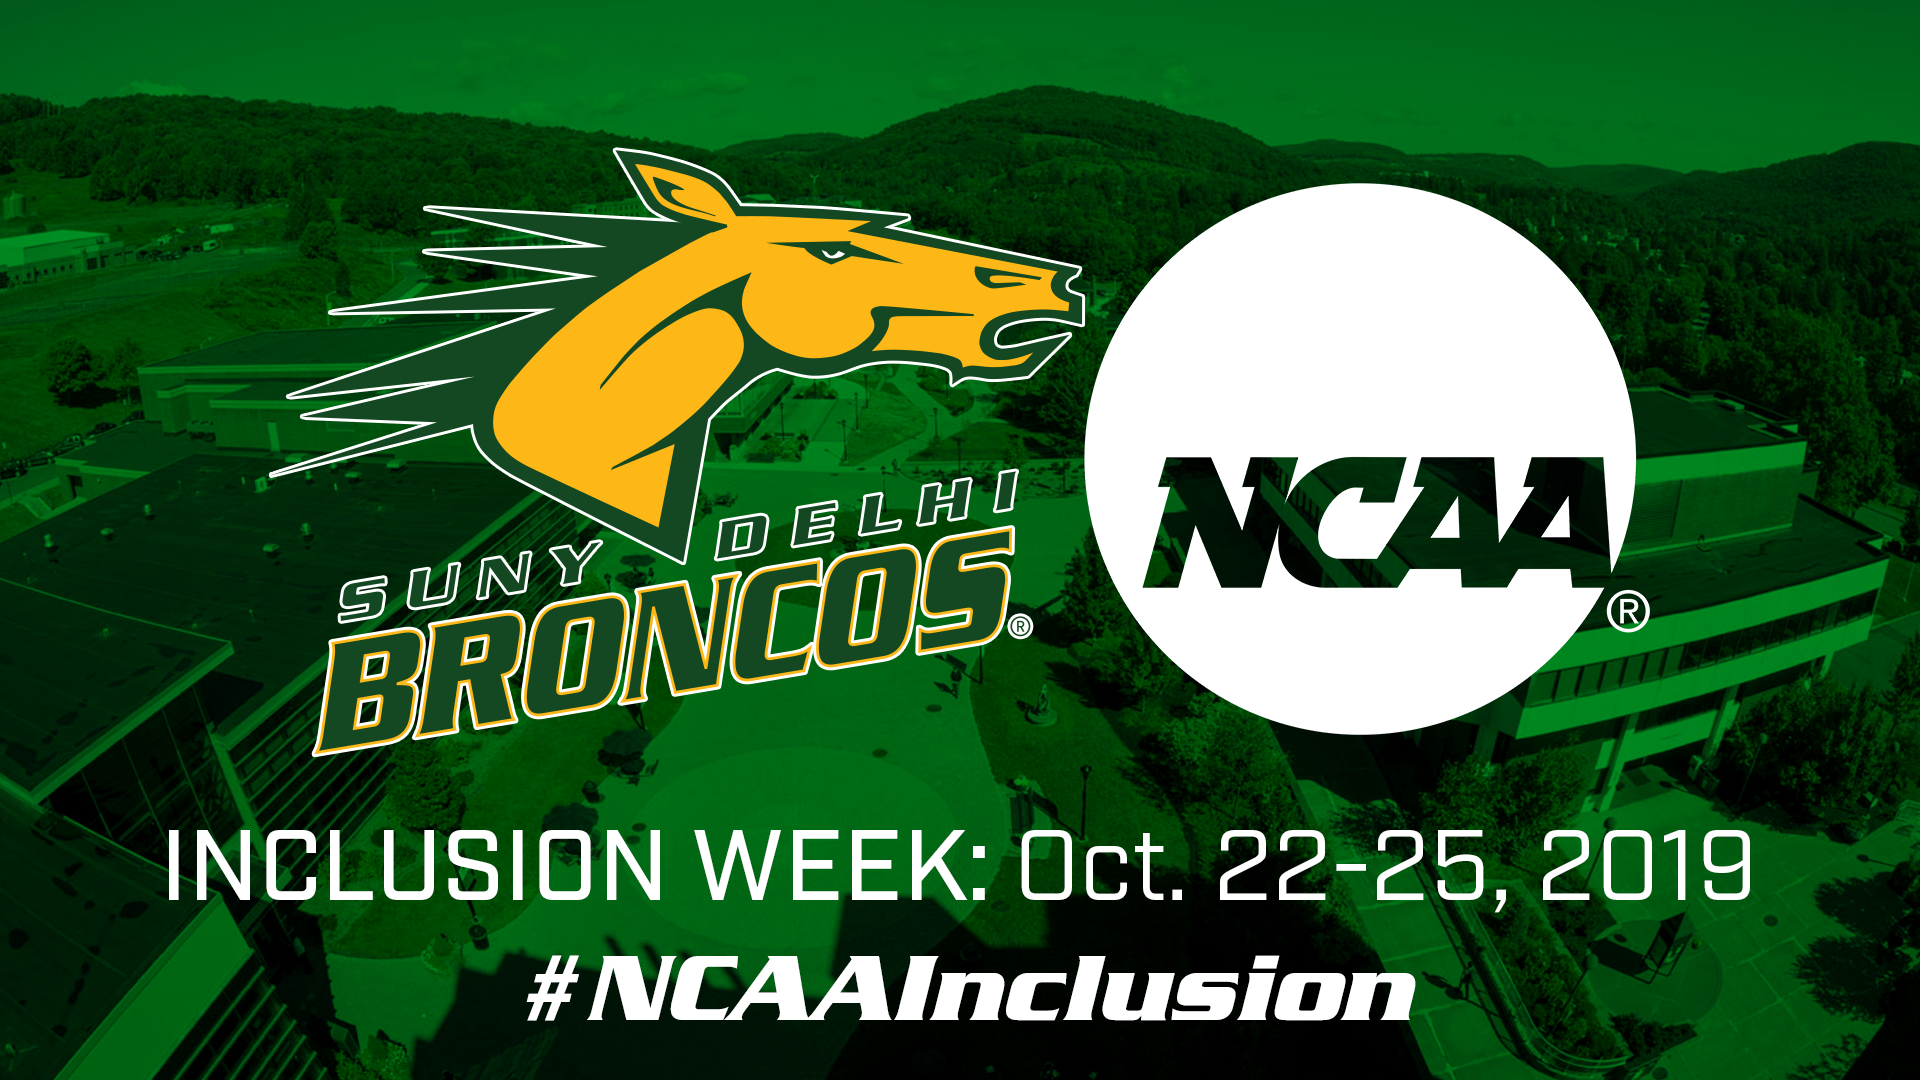 SUNY Delhi to Take Part in Second Annual NCAA Inclusion Week